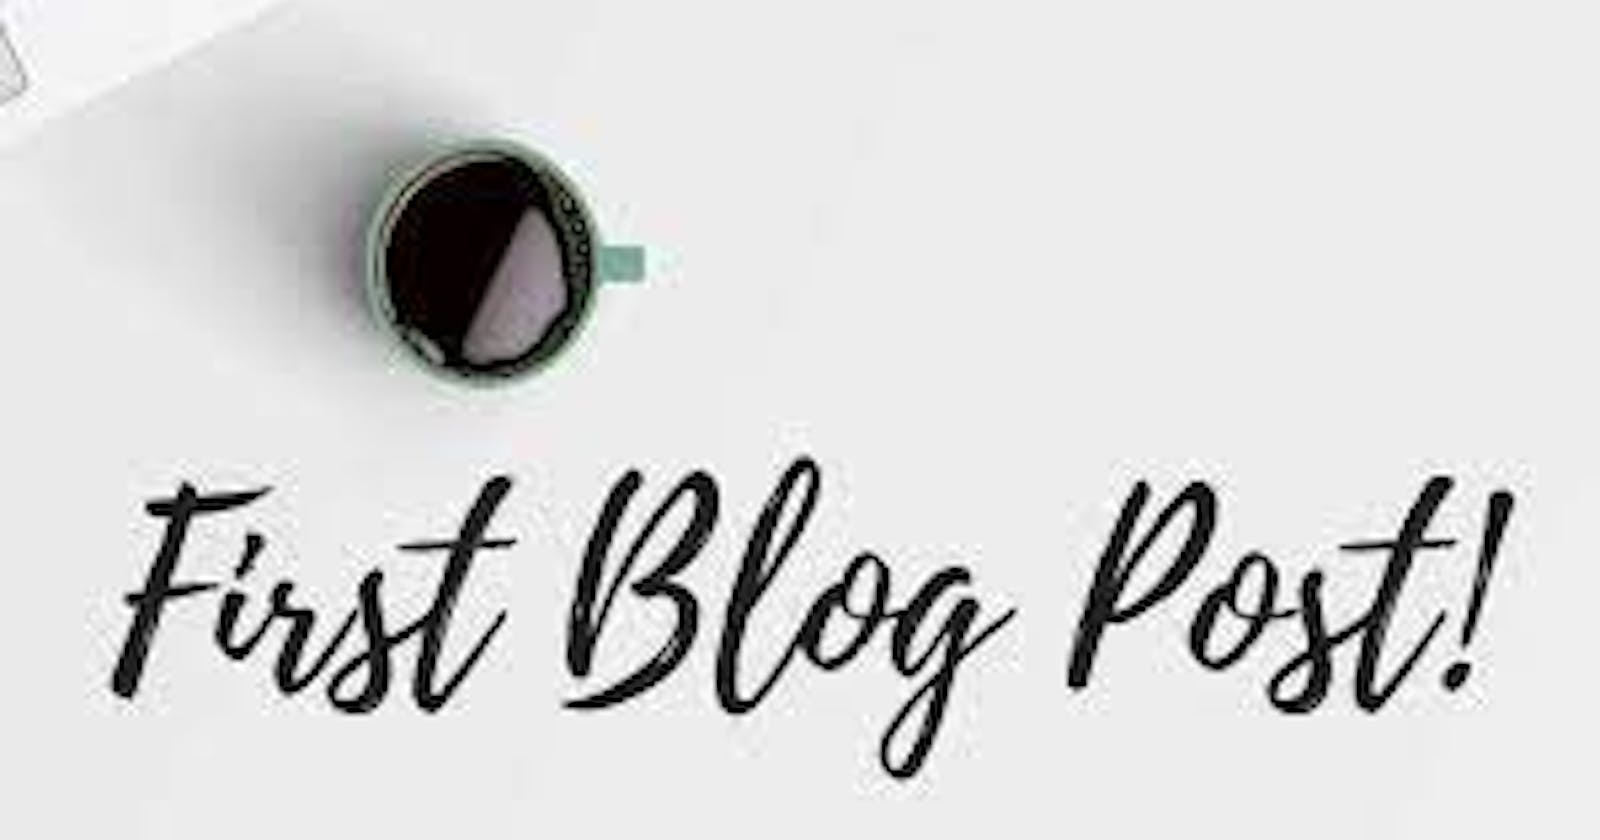 Challenges faced by a newbie to blogging